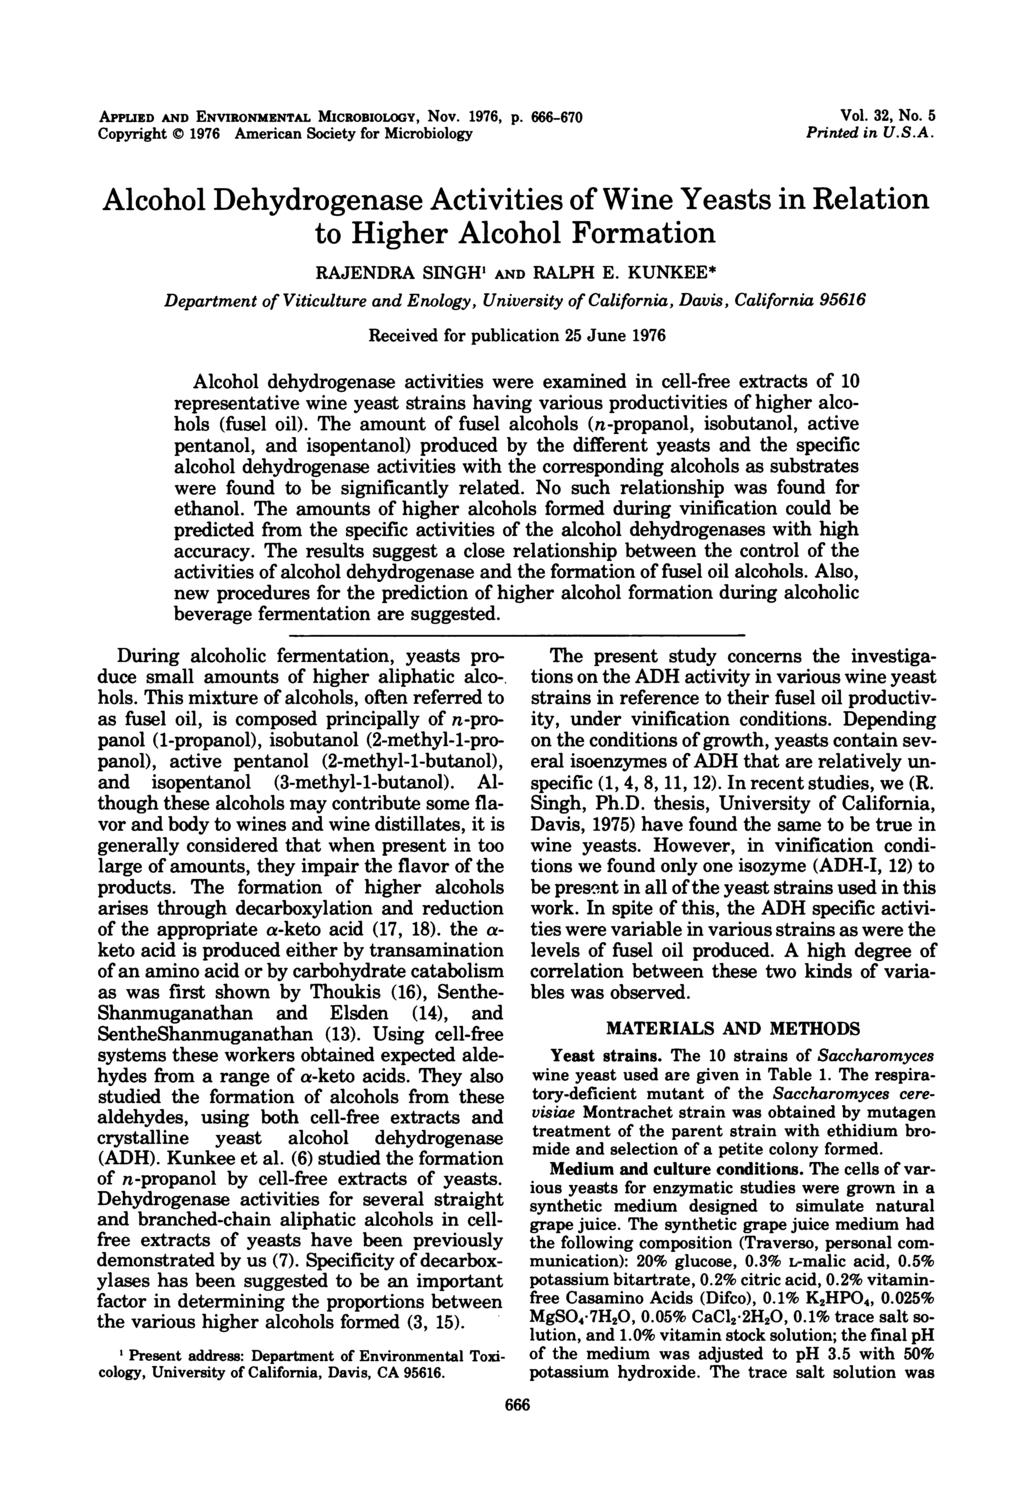 APPLID AND NVIRONMNTAL MICROBIOLOGY, Nov. 1976, p. 666-67 Copyright 1976 Americn Society for Microbiology Vol. 32, No. 5 Printed in U.S.A. Alcohol Dehydrogense Activities of Wine Yests in Reltion to Higher Alcohol Formtion RAJNDRA SINGH' AND RALPH.